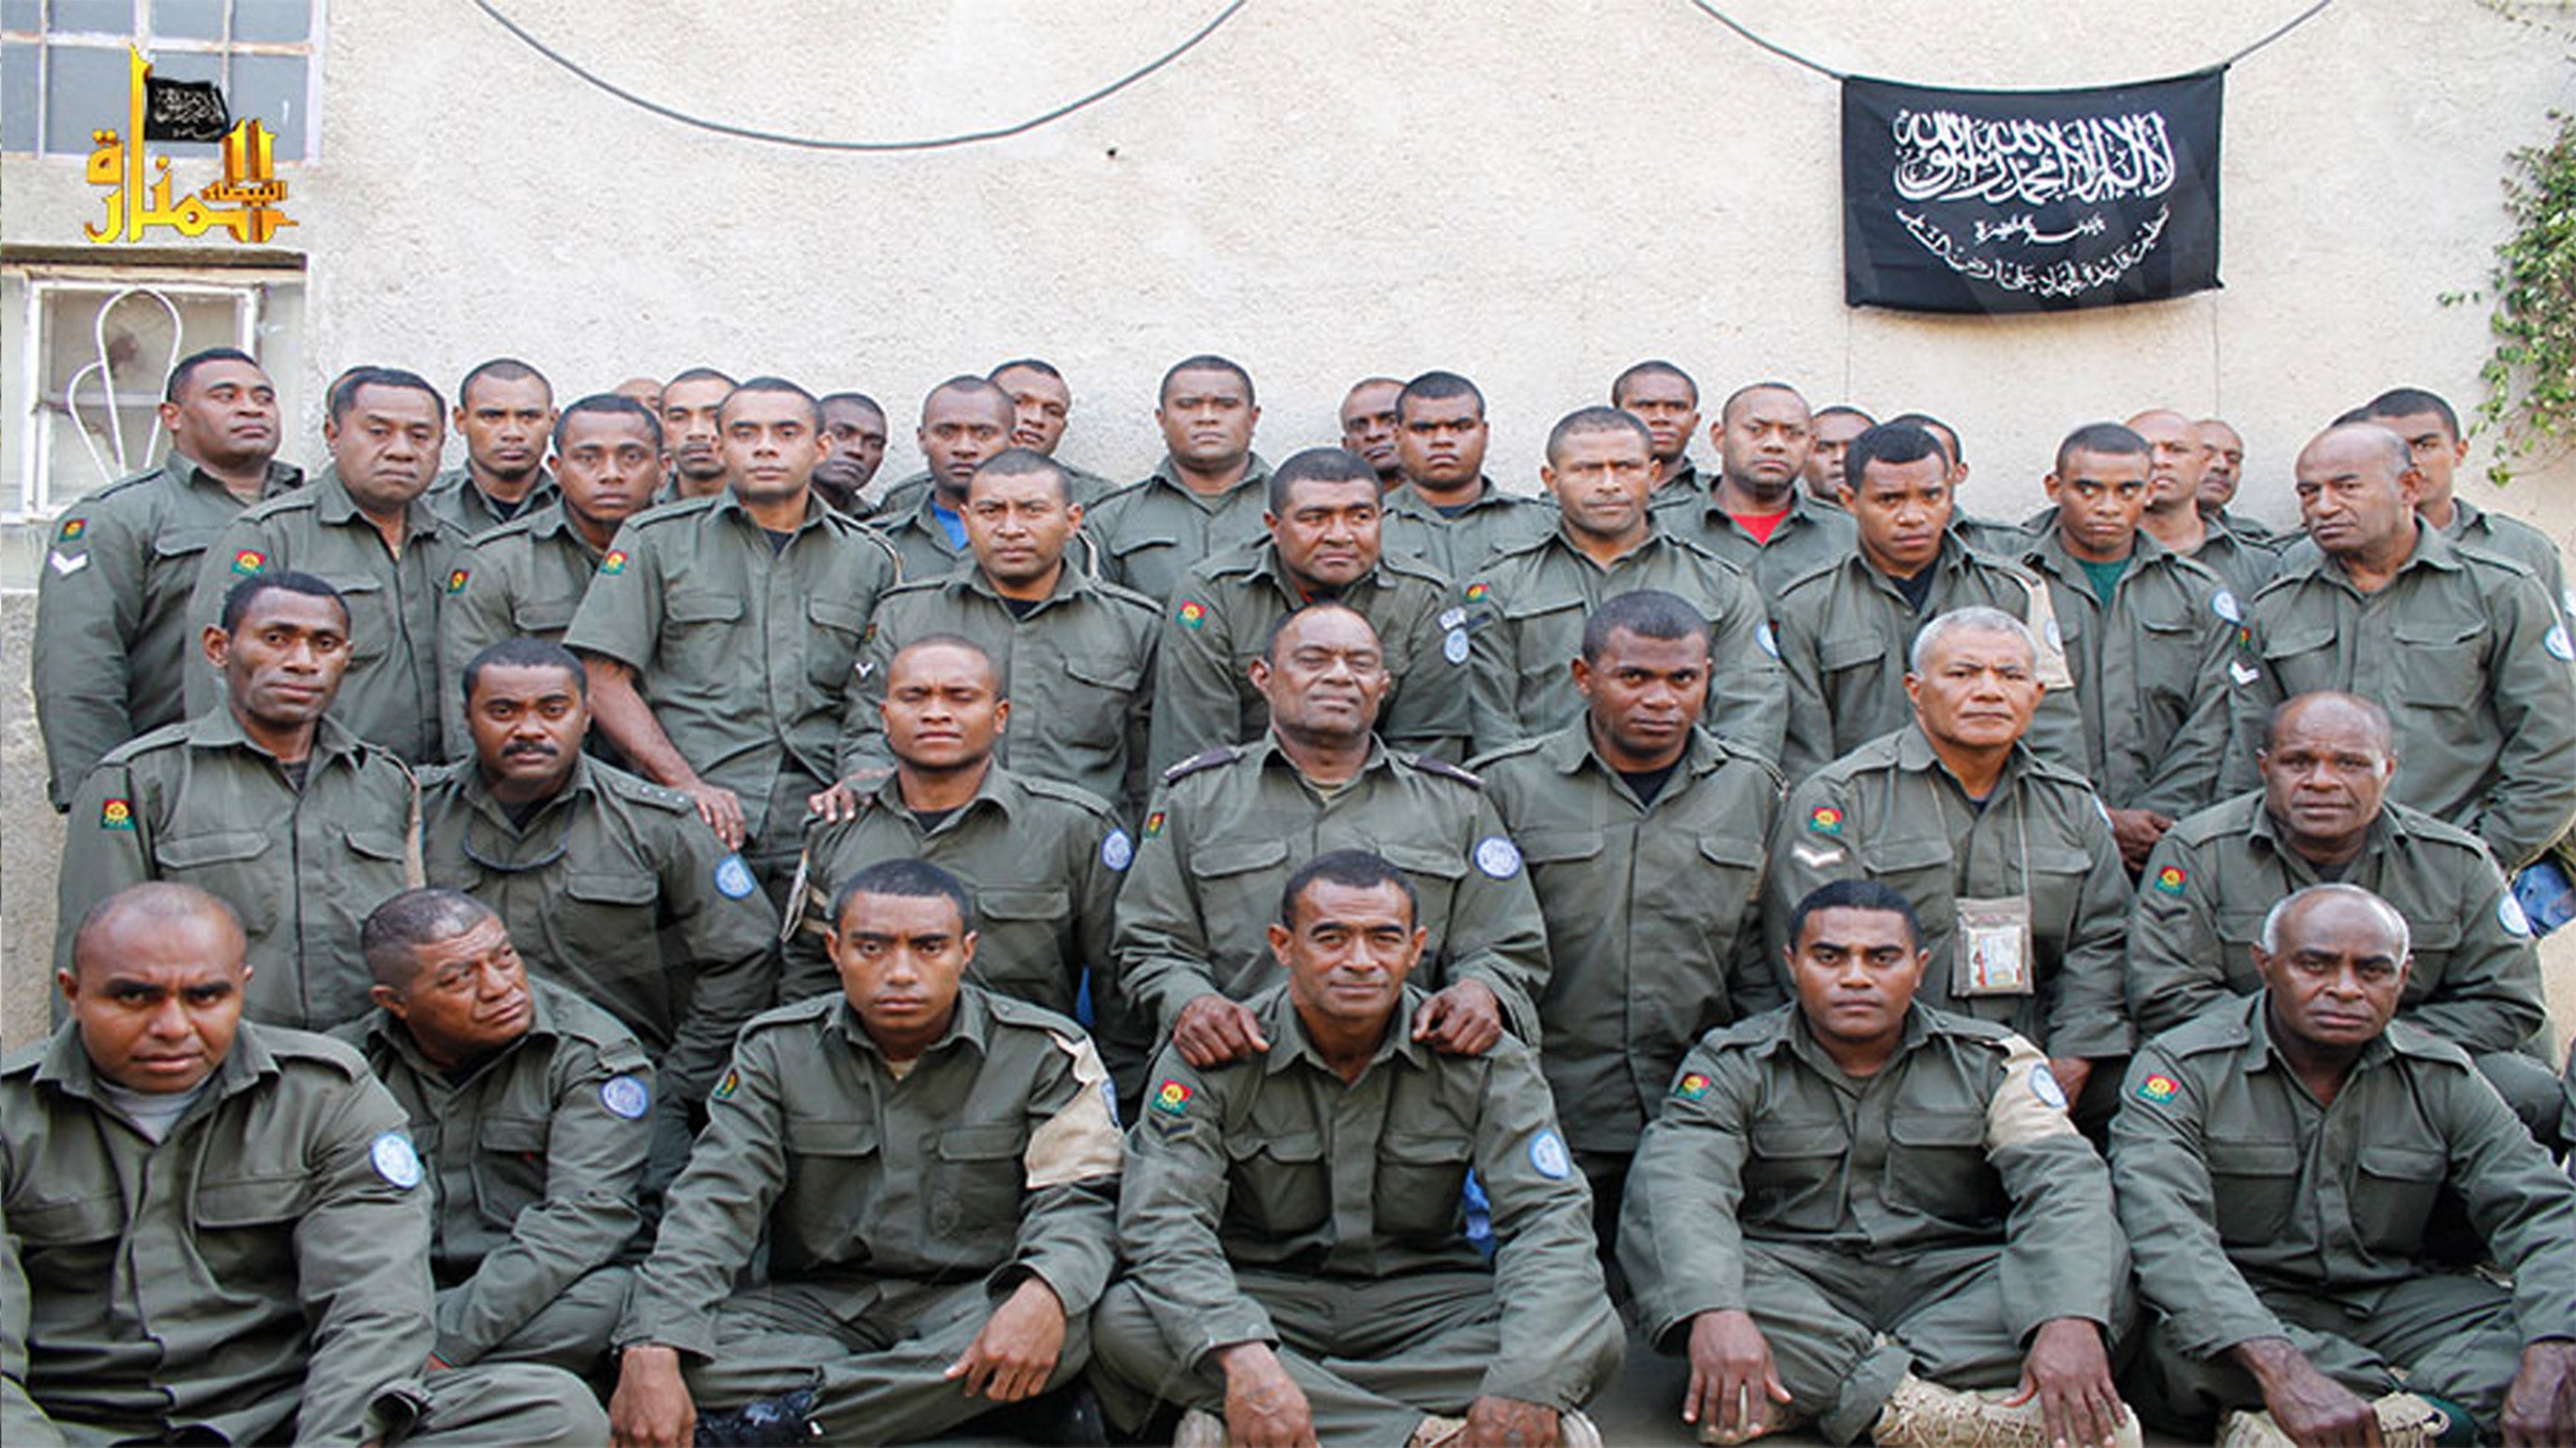 tHE Fijian UN peacekeepers who were seized by The Nusra Front on Thursday